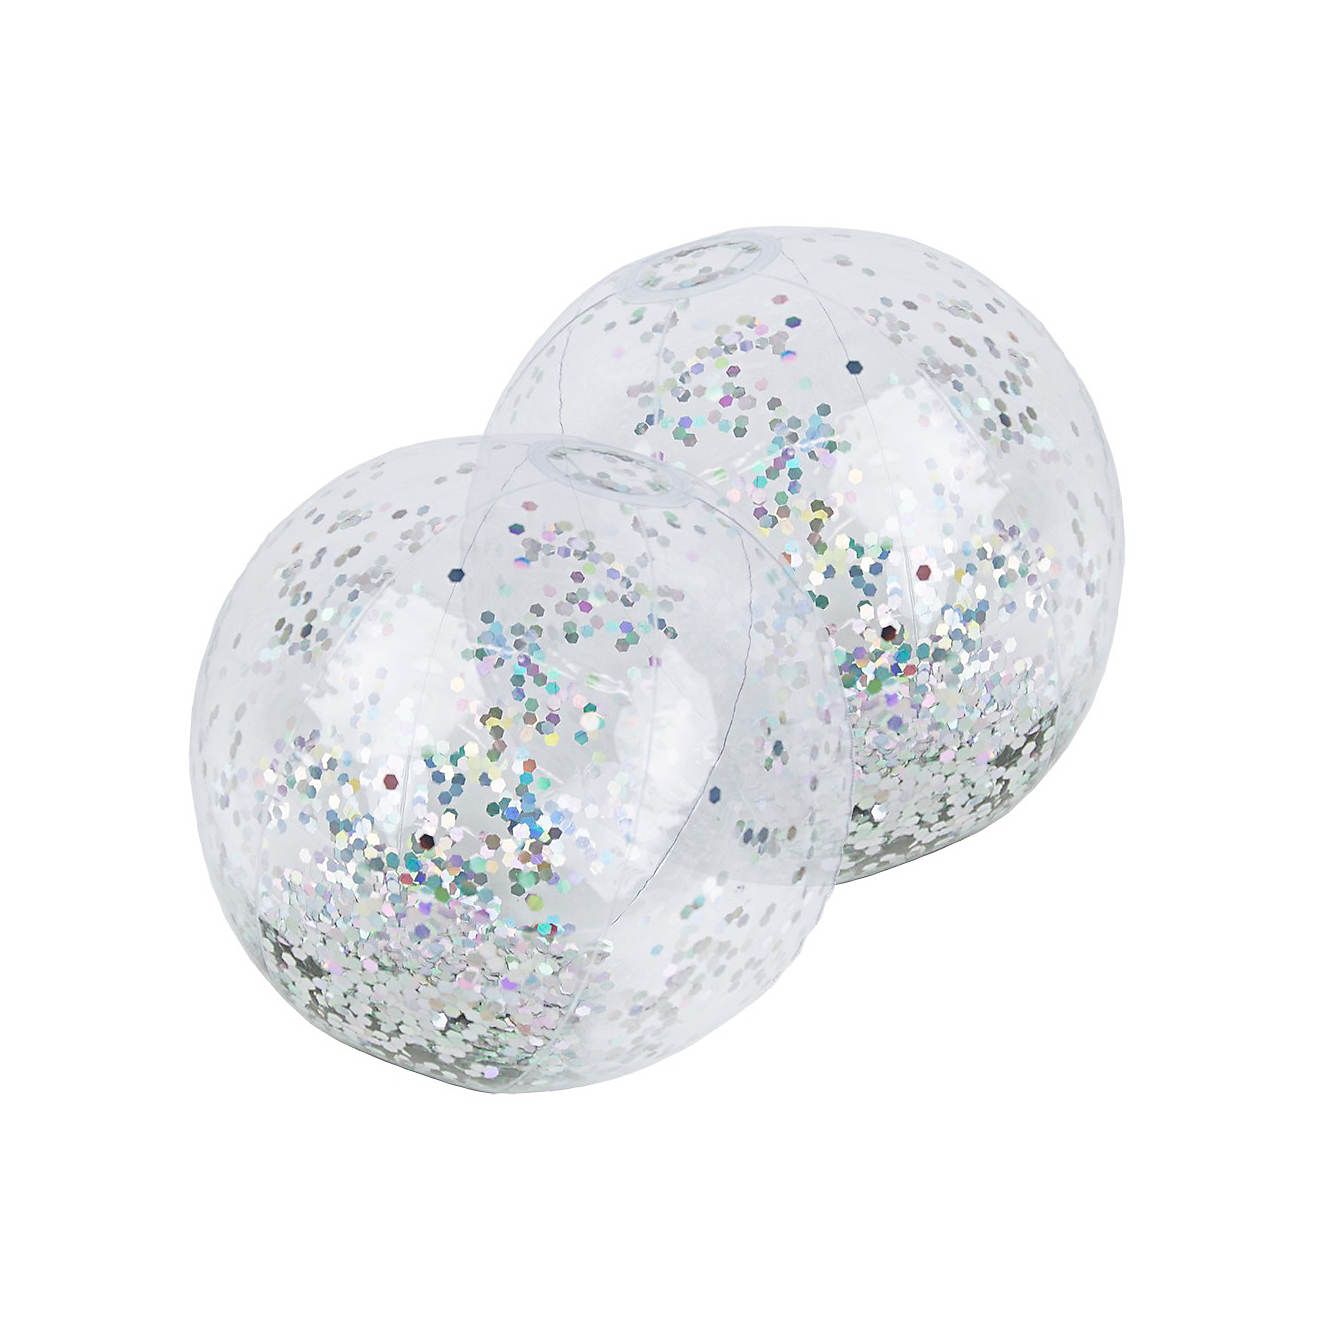 Poolmaster 16 in Glitter Pool Balls 2-Pack | Academy Sports + Outdoor Affiliate